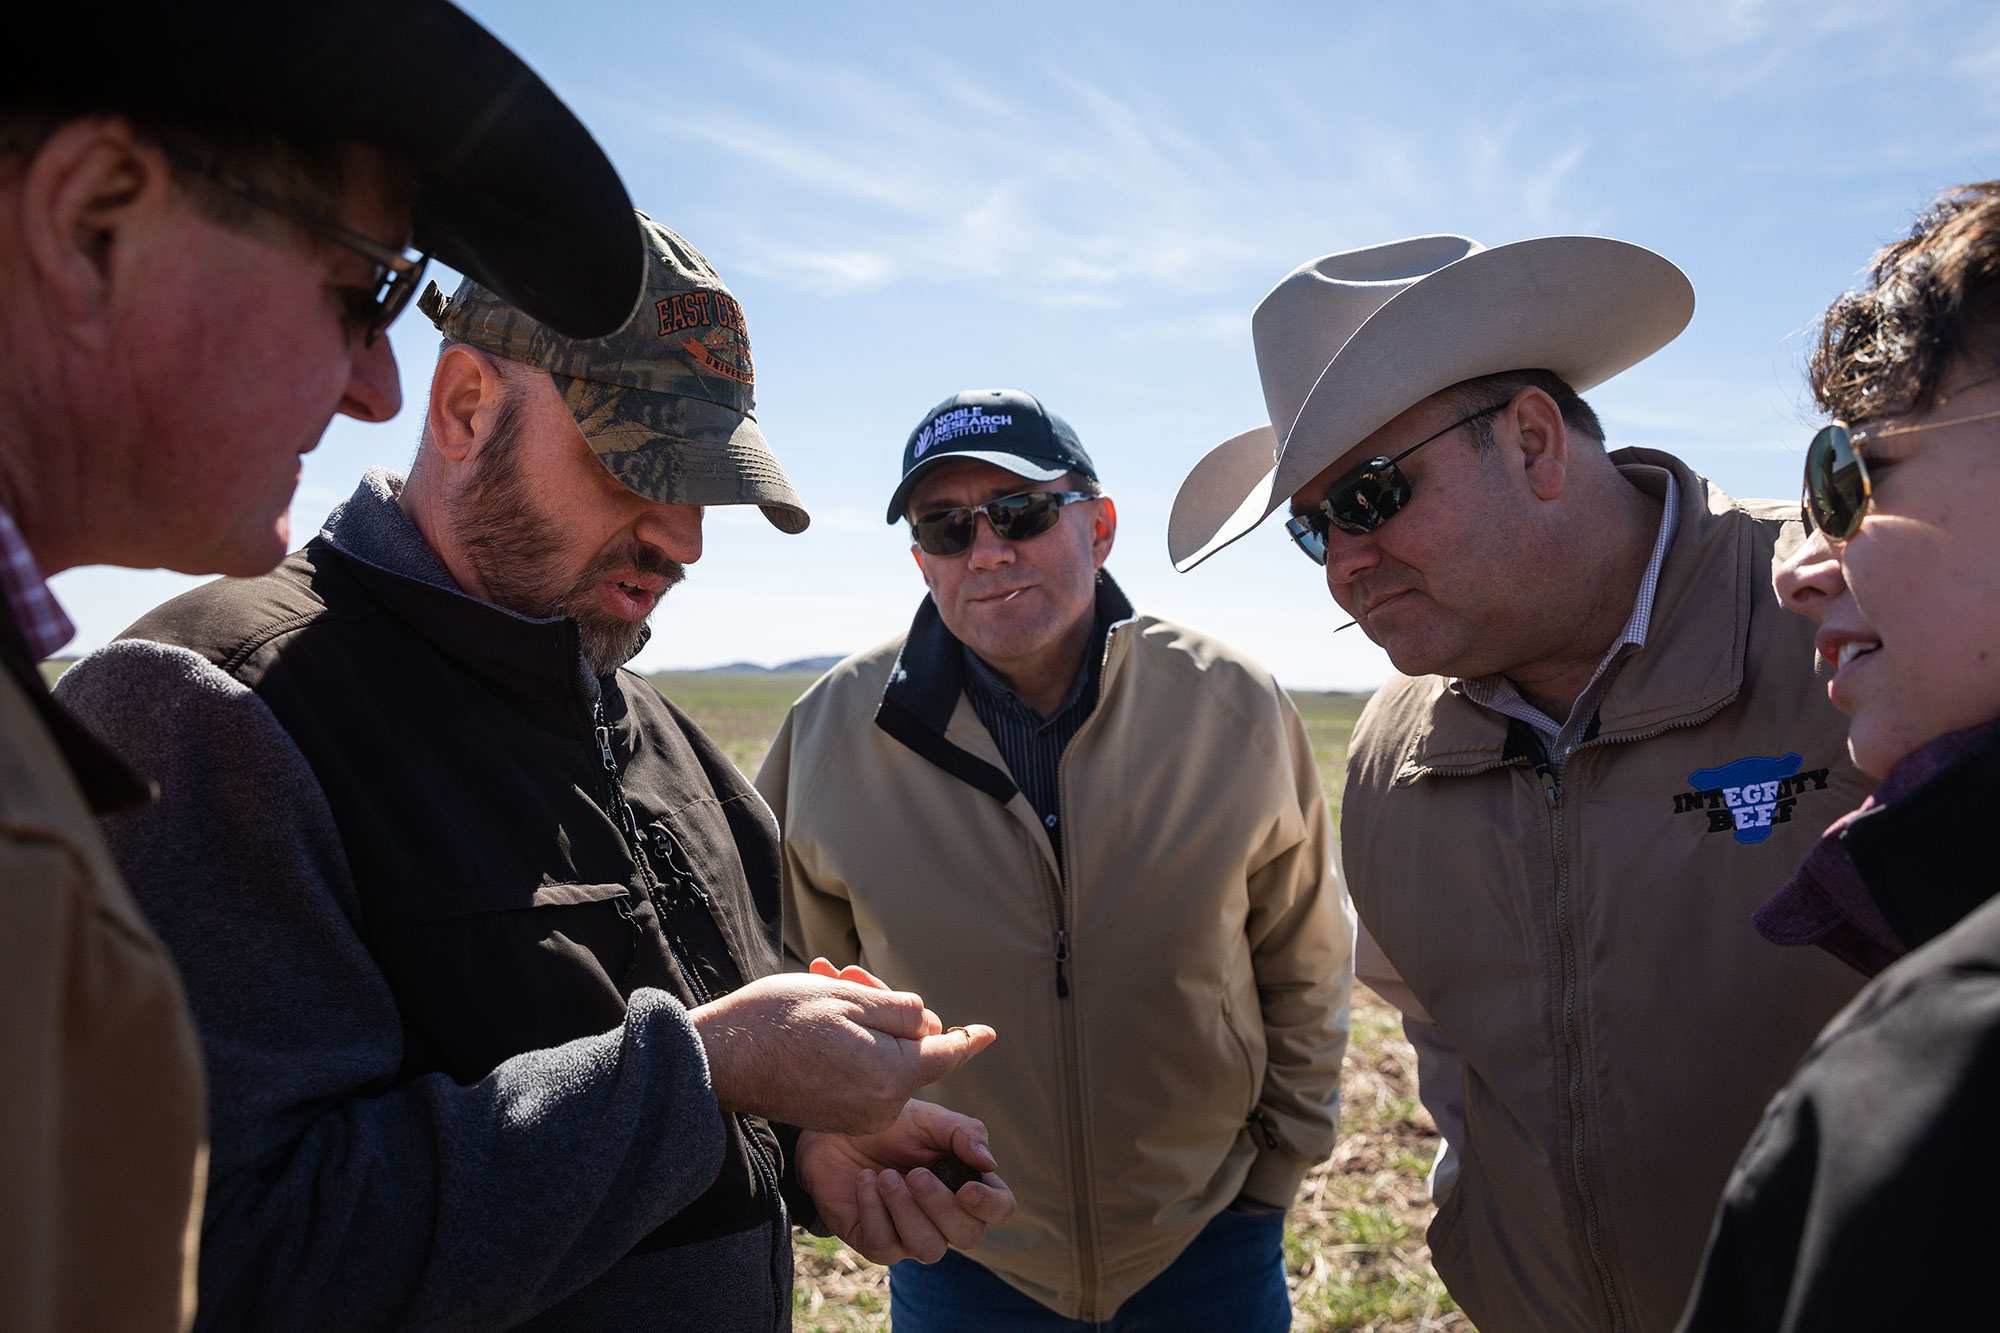 Consultants and producers look at the soil